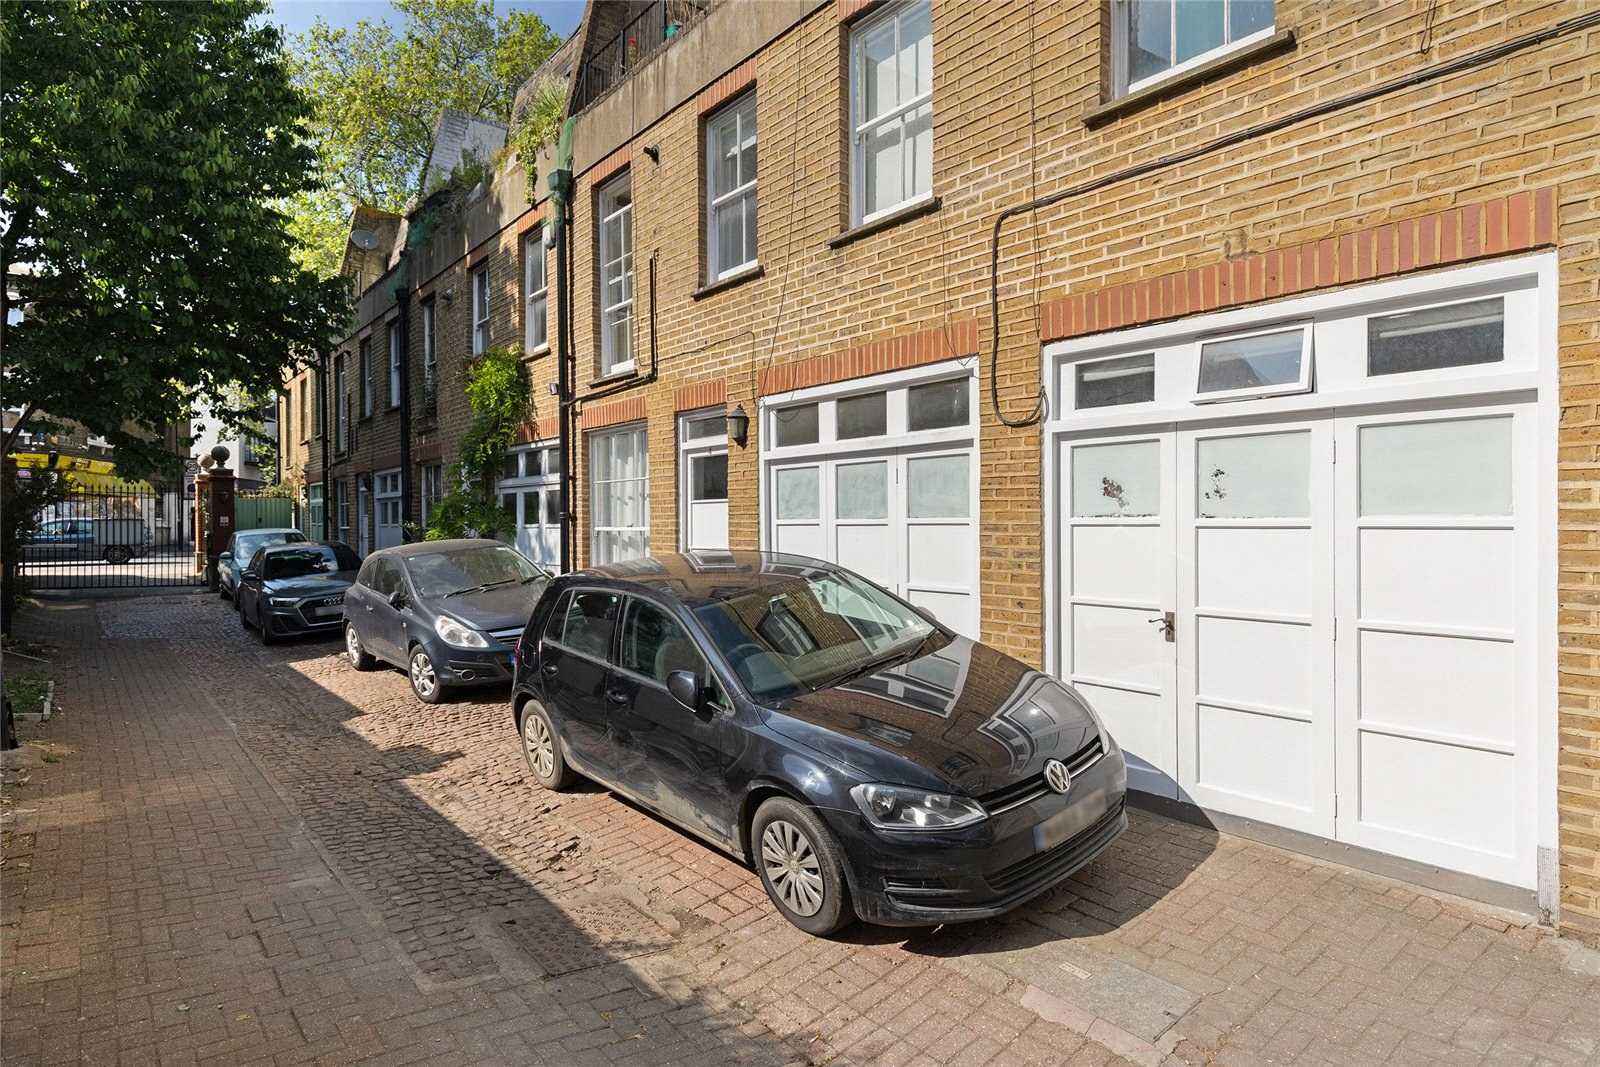 House in Hampstead, Quex Mews 12317100